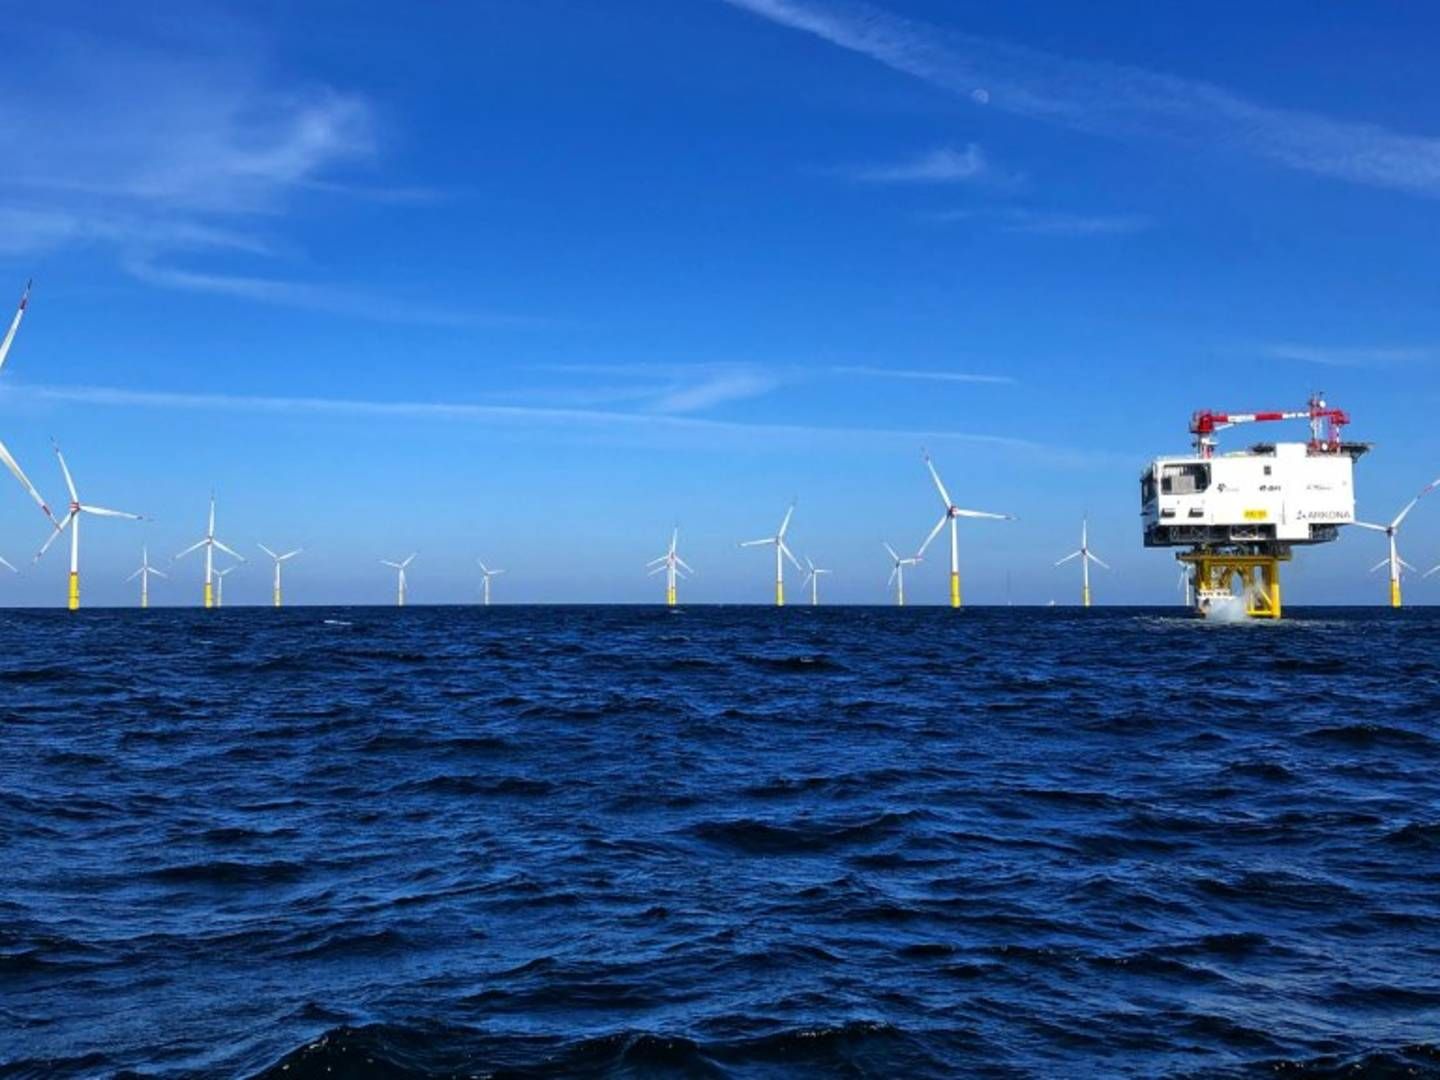 German offshore wind farm Altona is one of few in the Baltic Sea. WindEuope slates Poland to assume regional dominance with around 28 GWby 2050. | Photo: Equinor